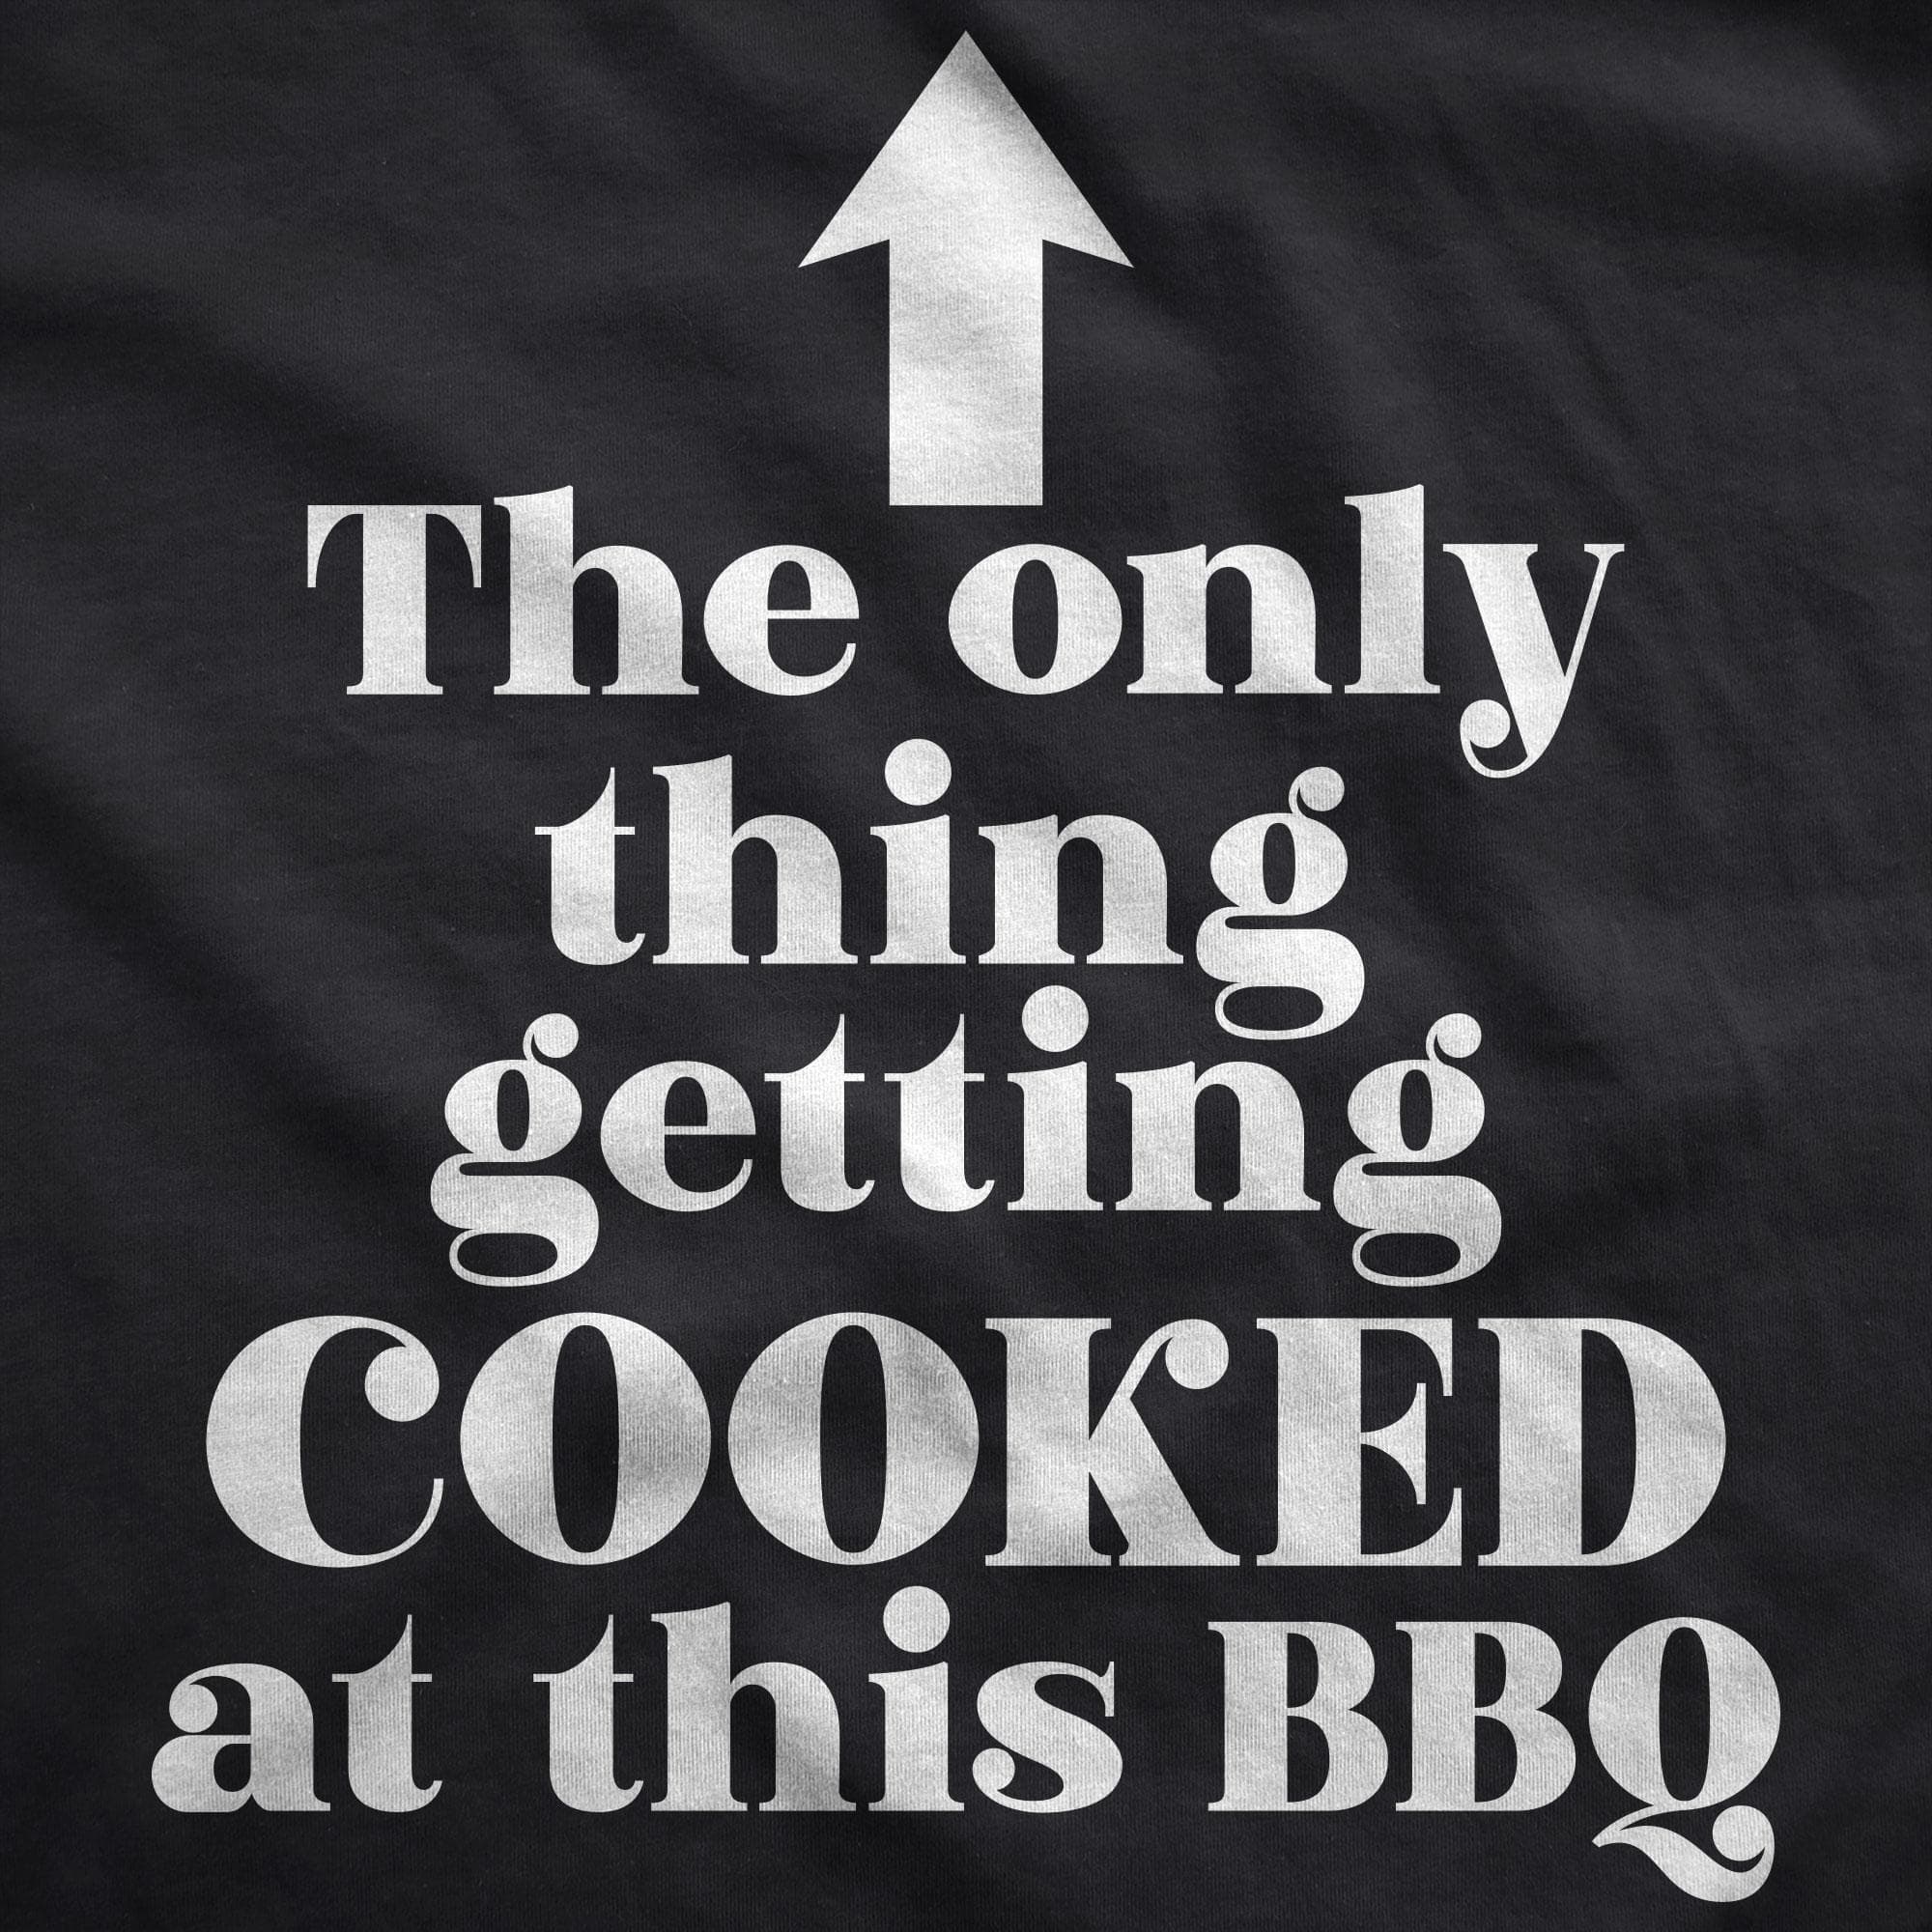 The Only Thing Getting Cooked At This BBQ Cookout Apron - Crazy Dog T-Shirts